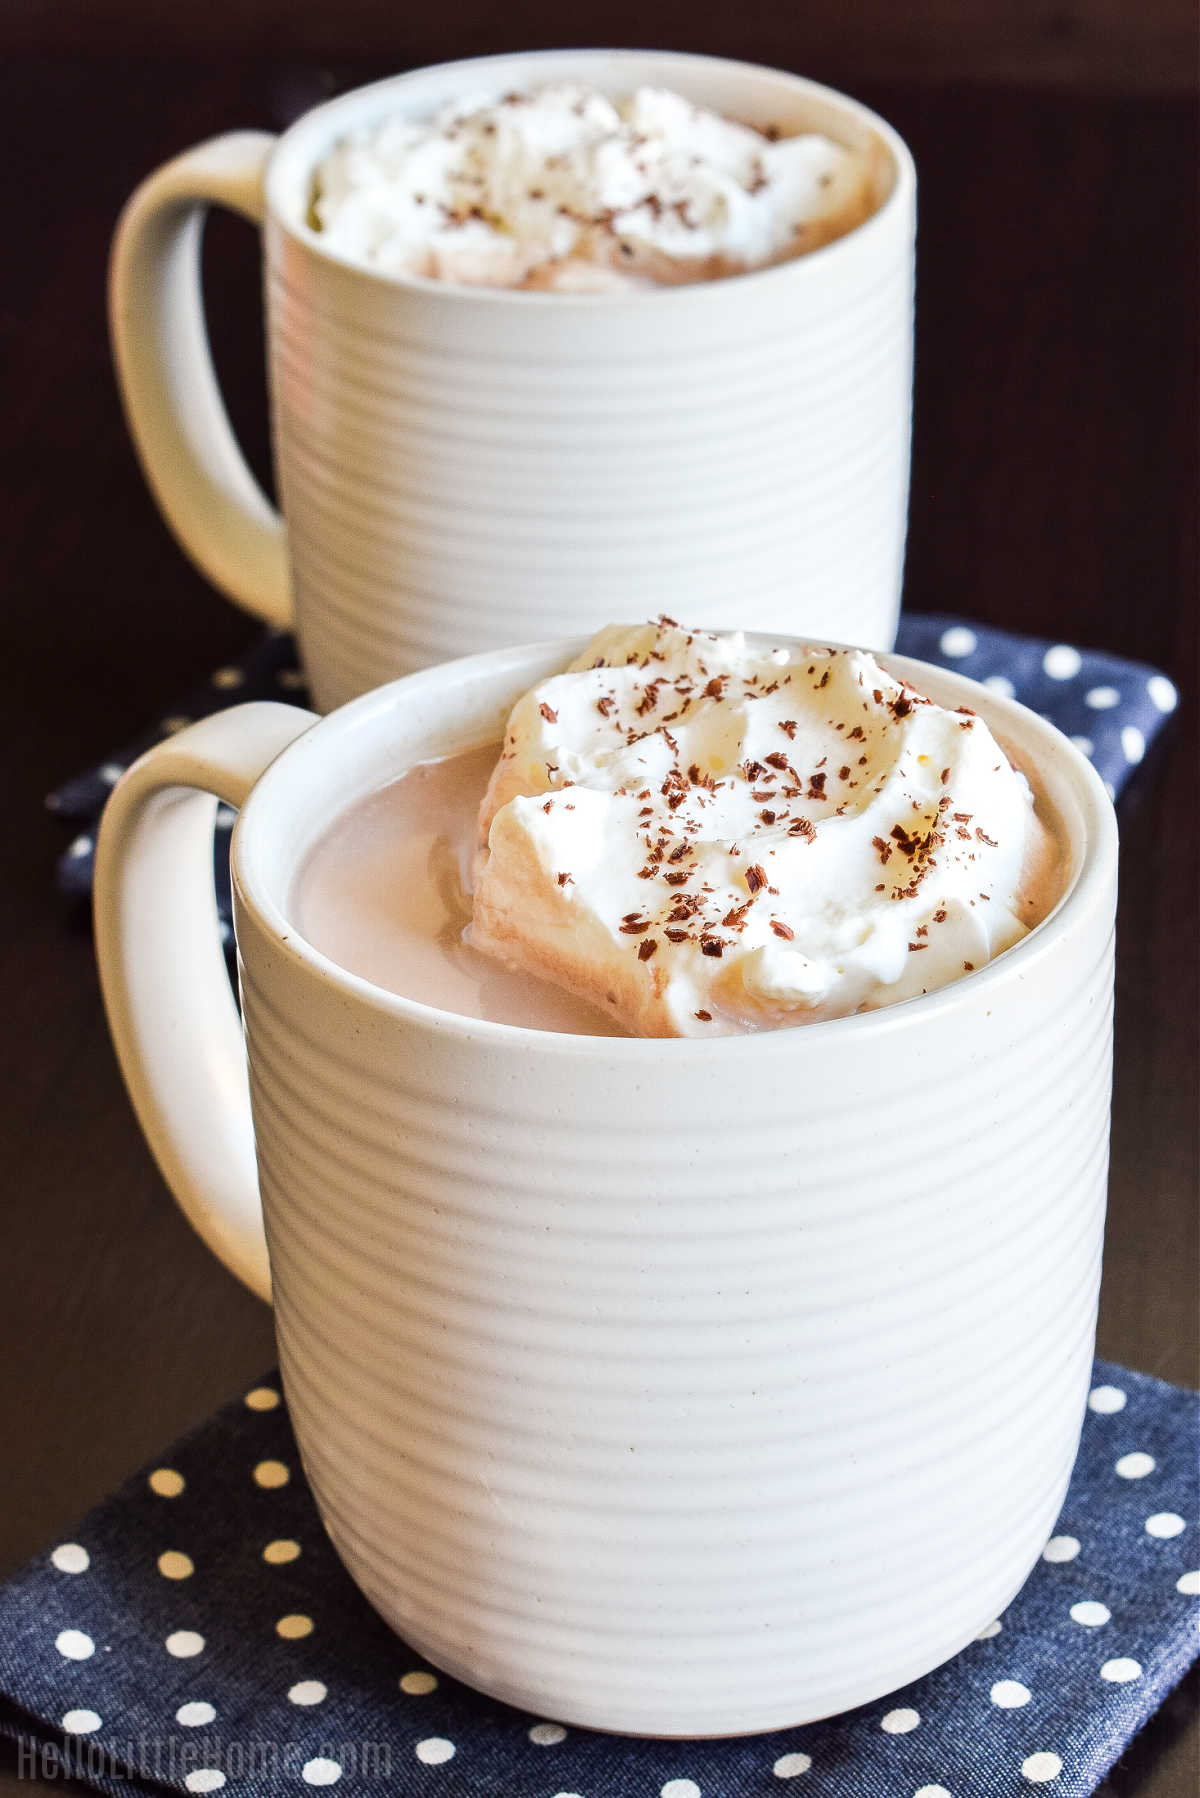 Mugs of the finished drink topped with whipped cream and served on a dark wood table.